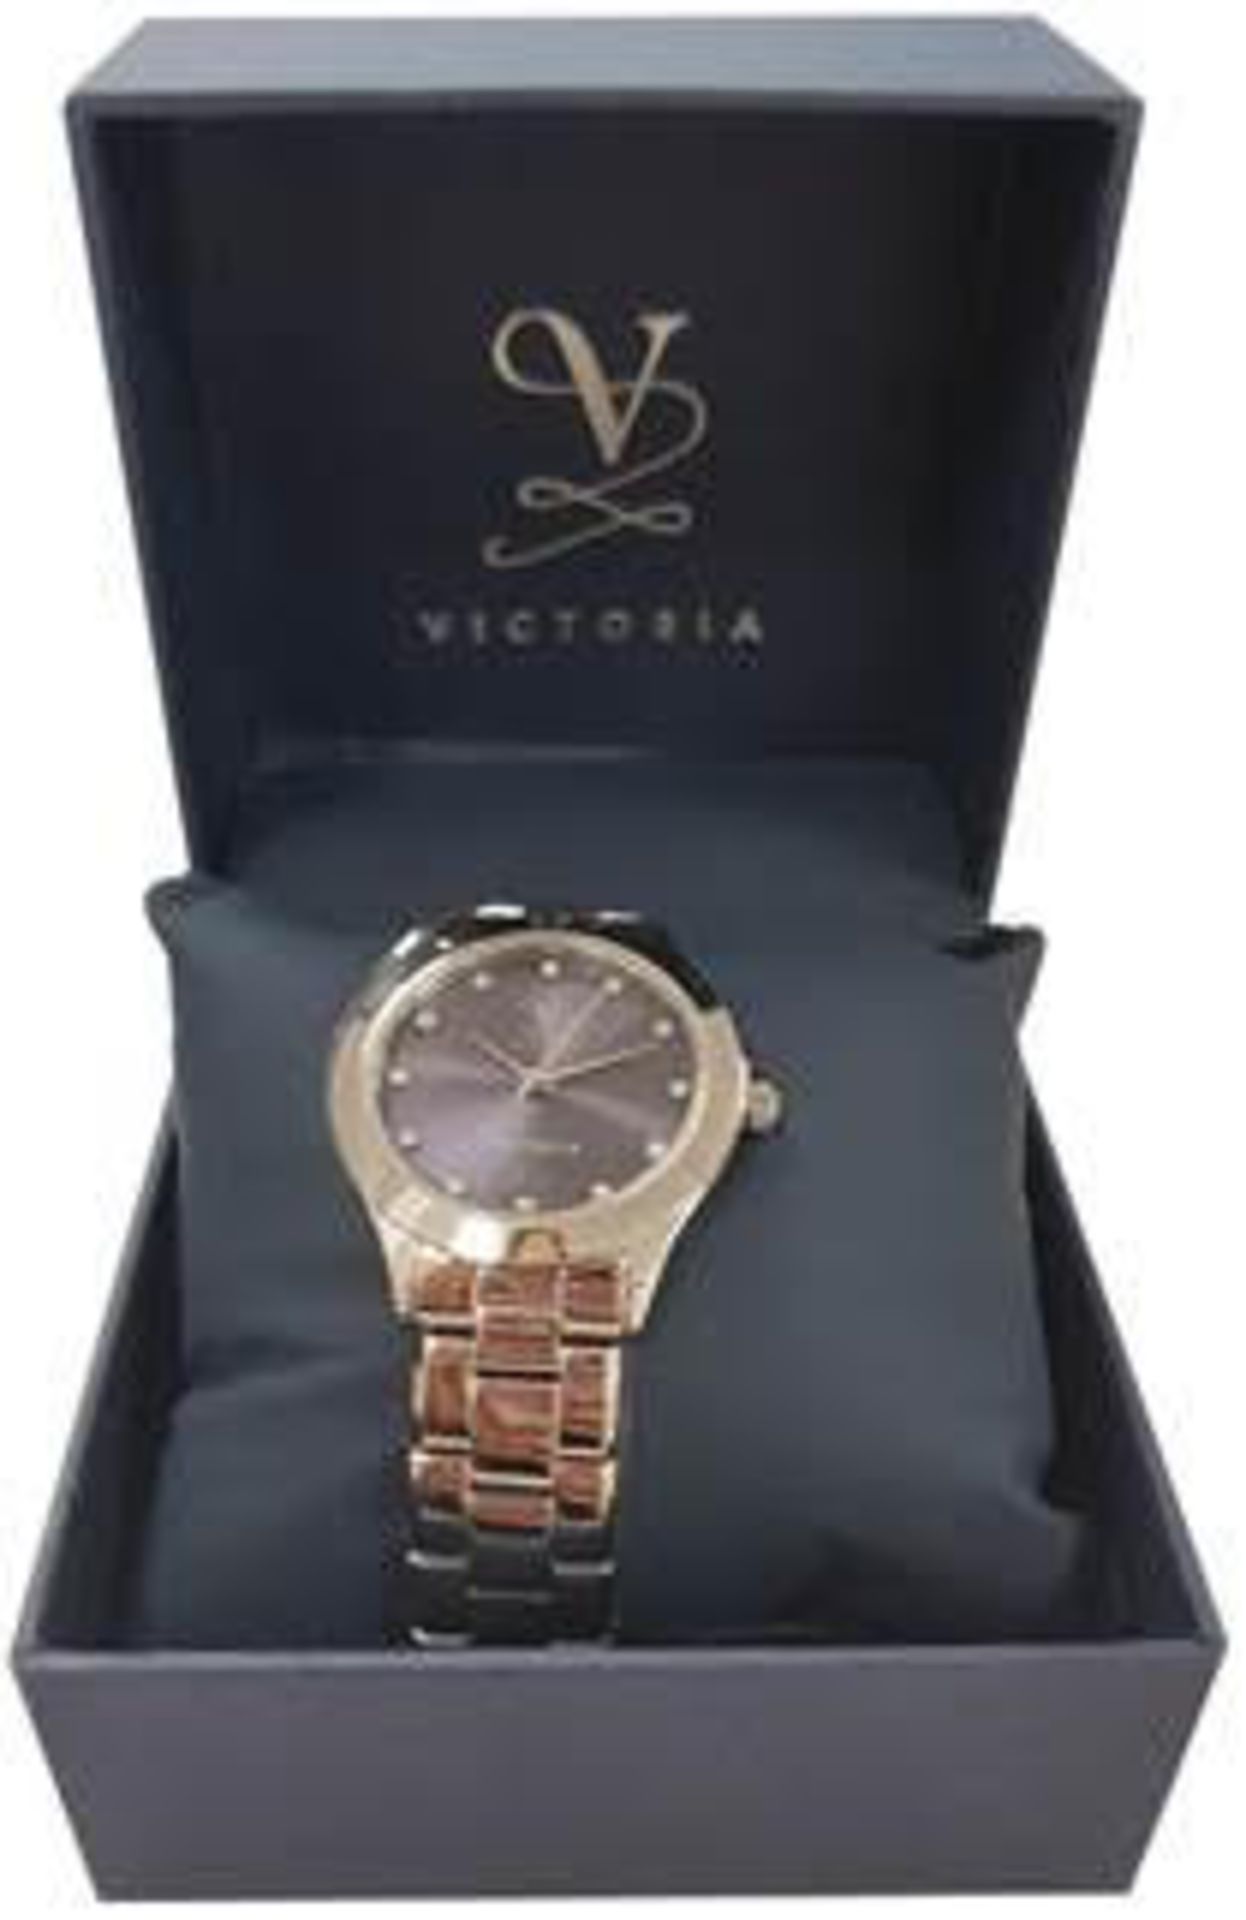 V Brand New Ladies Victoria Stainless Steel Watch With Bracelet Strap - Navy Face - Silver Hands - - Image 2 of 3